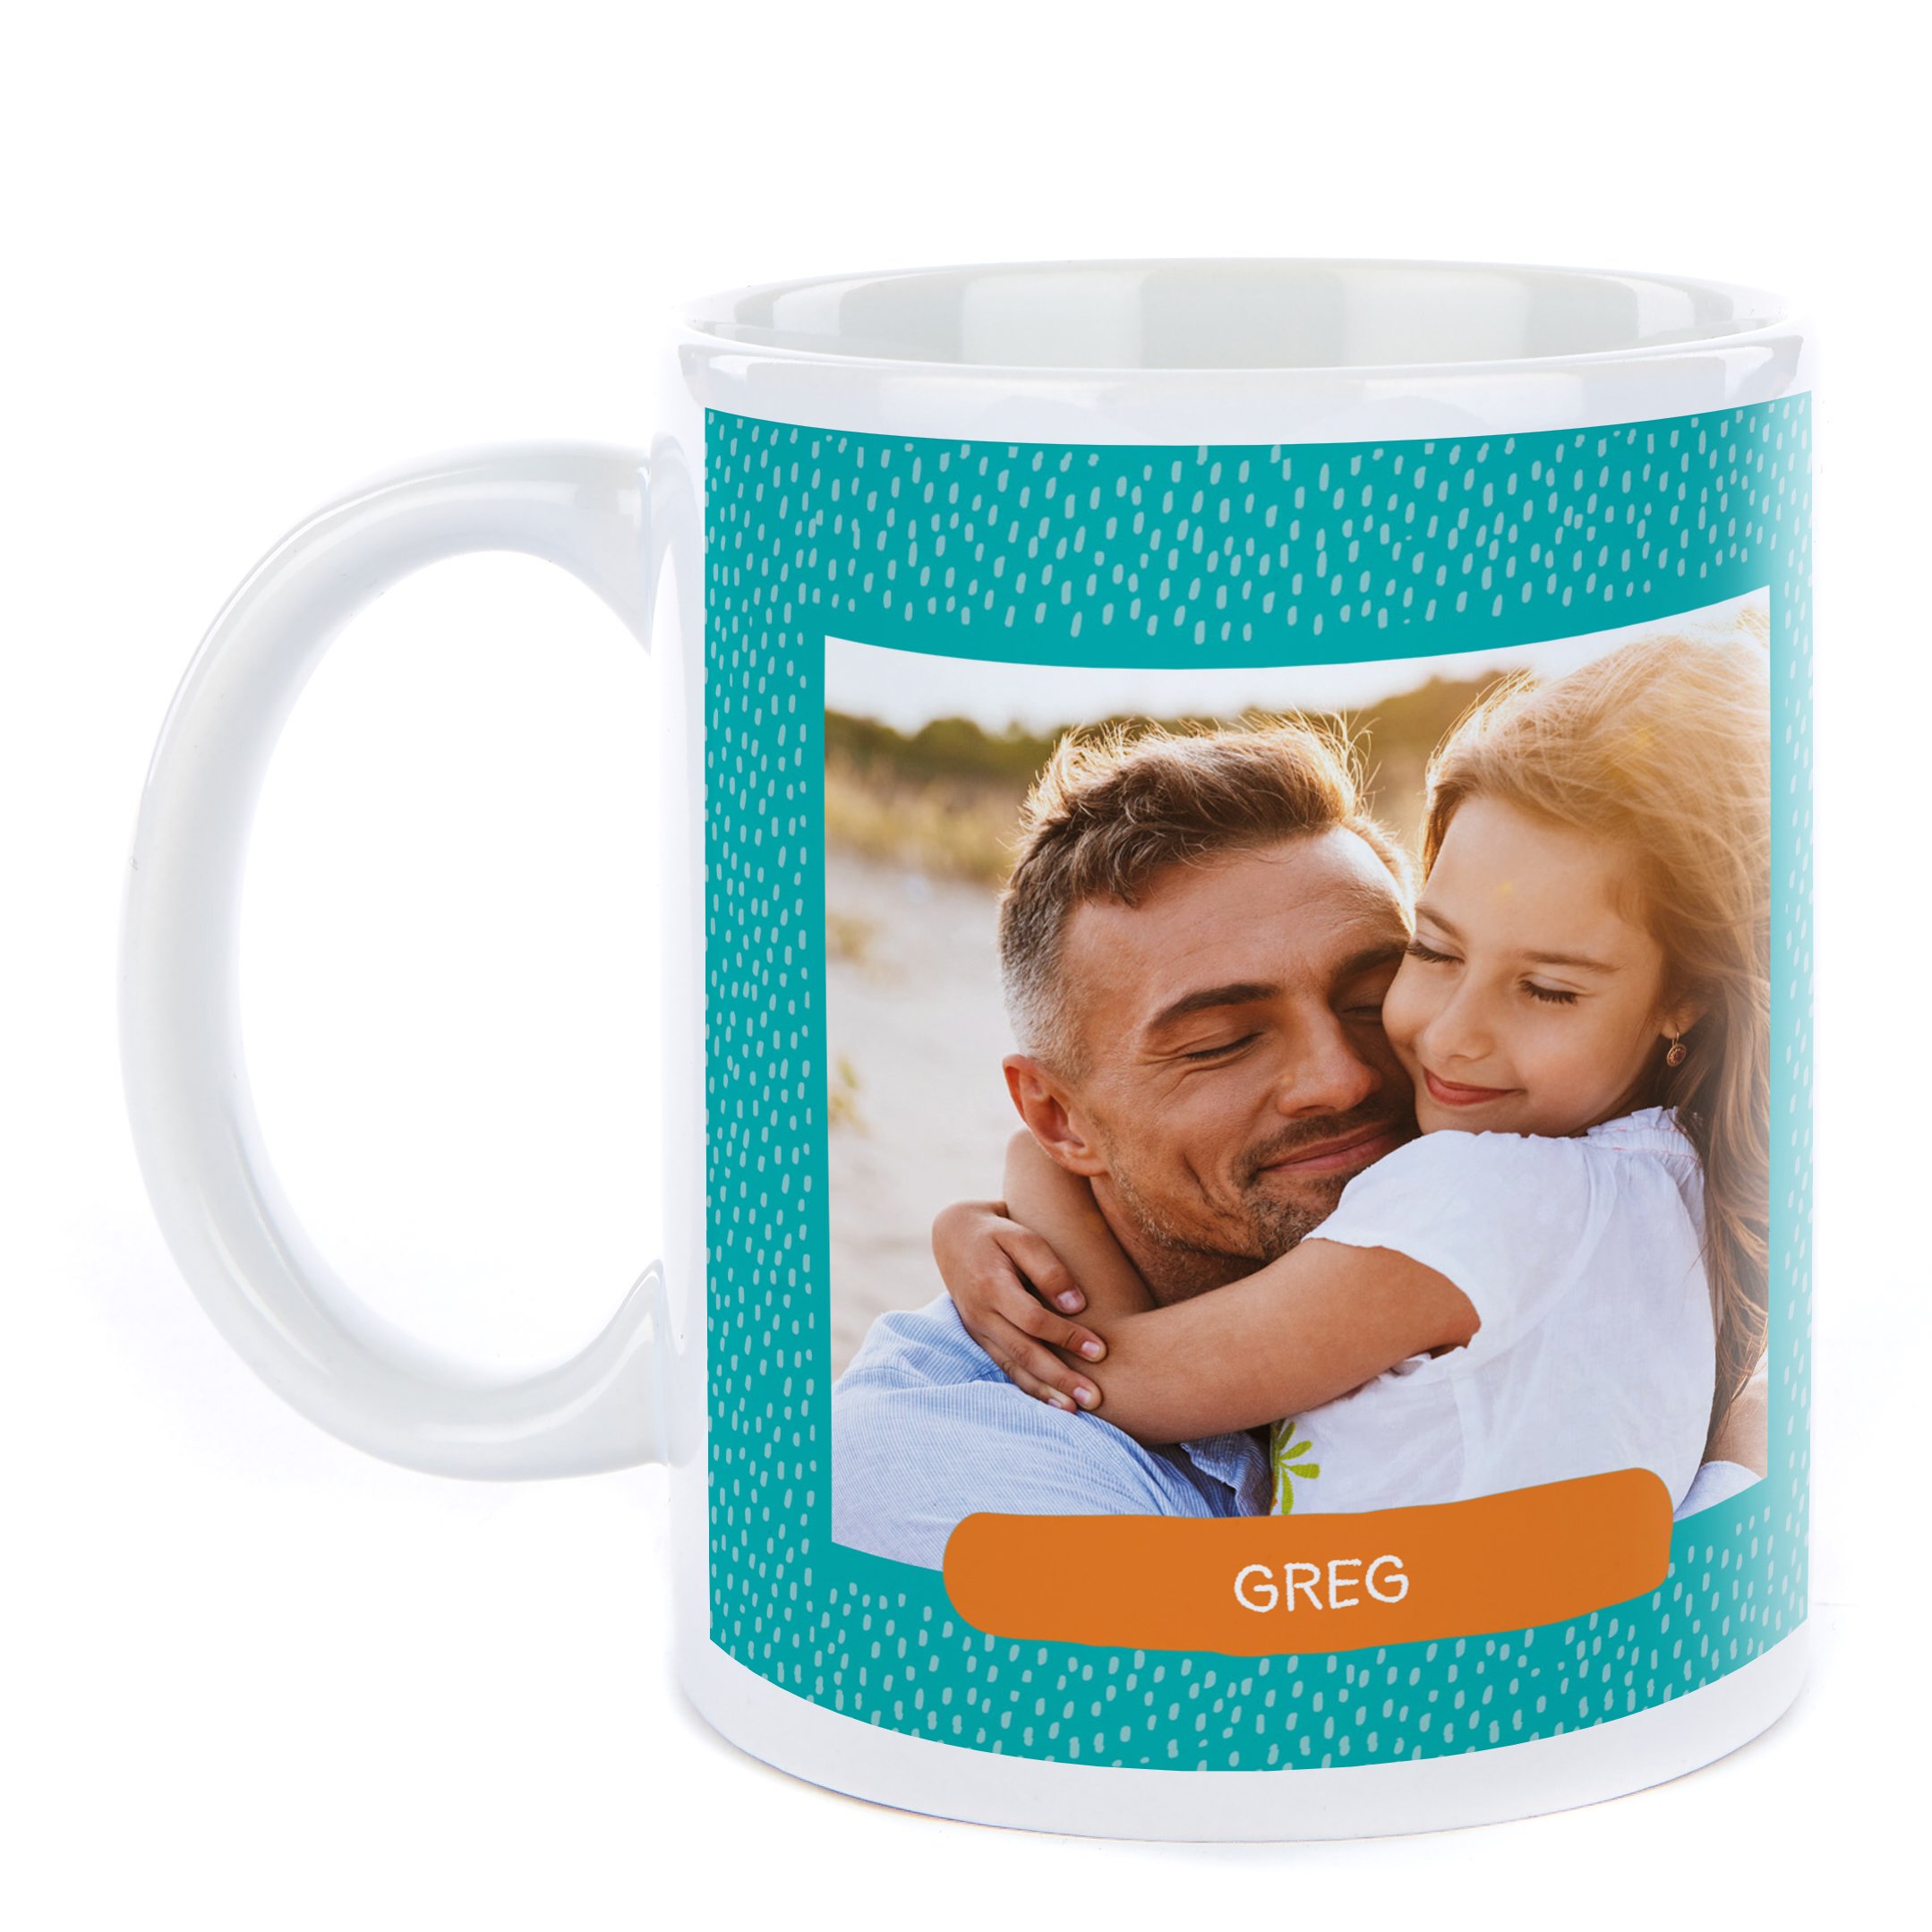 Photo Father's Day Mug - Daddy, Prickly Face